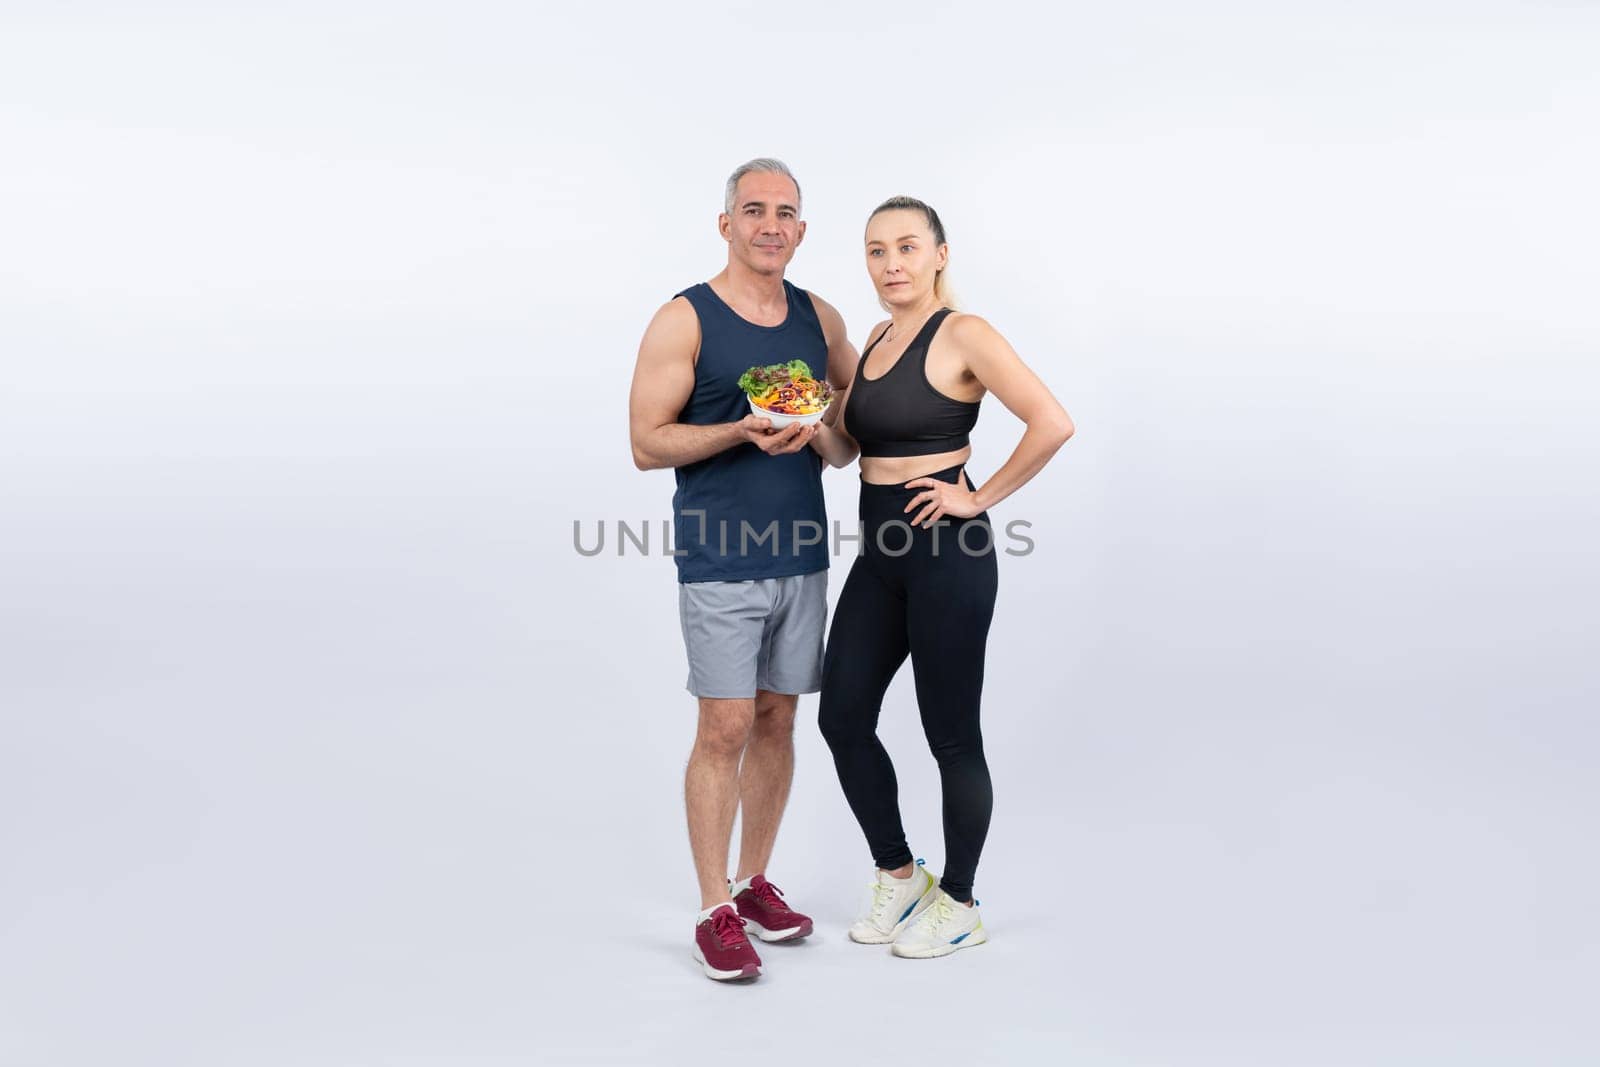 Happy smile senior man and woman portrait holding bowl of vegan fruit and vegetable on isolated background. Healthy senior couple with healthy vegetarian nutrition and body care lifestyle. Clout